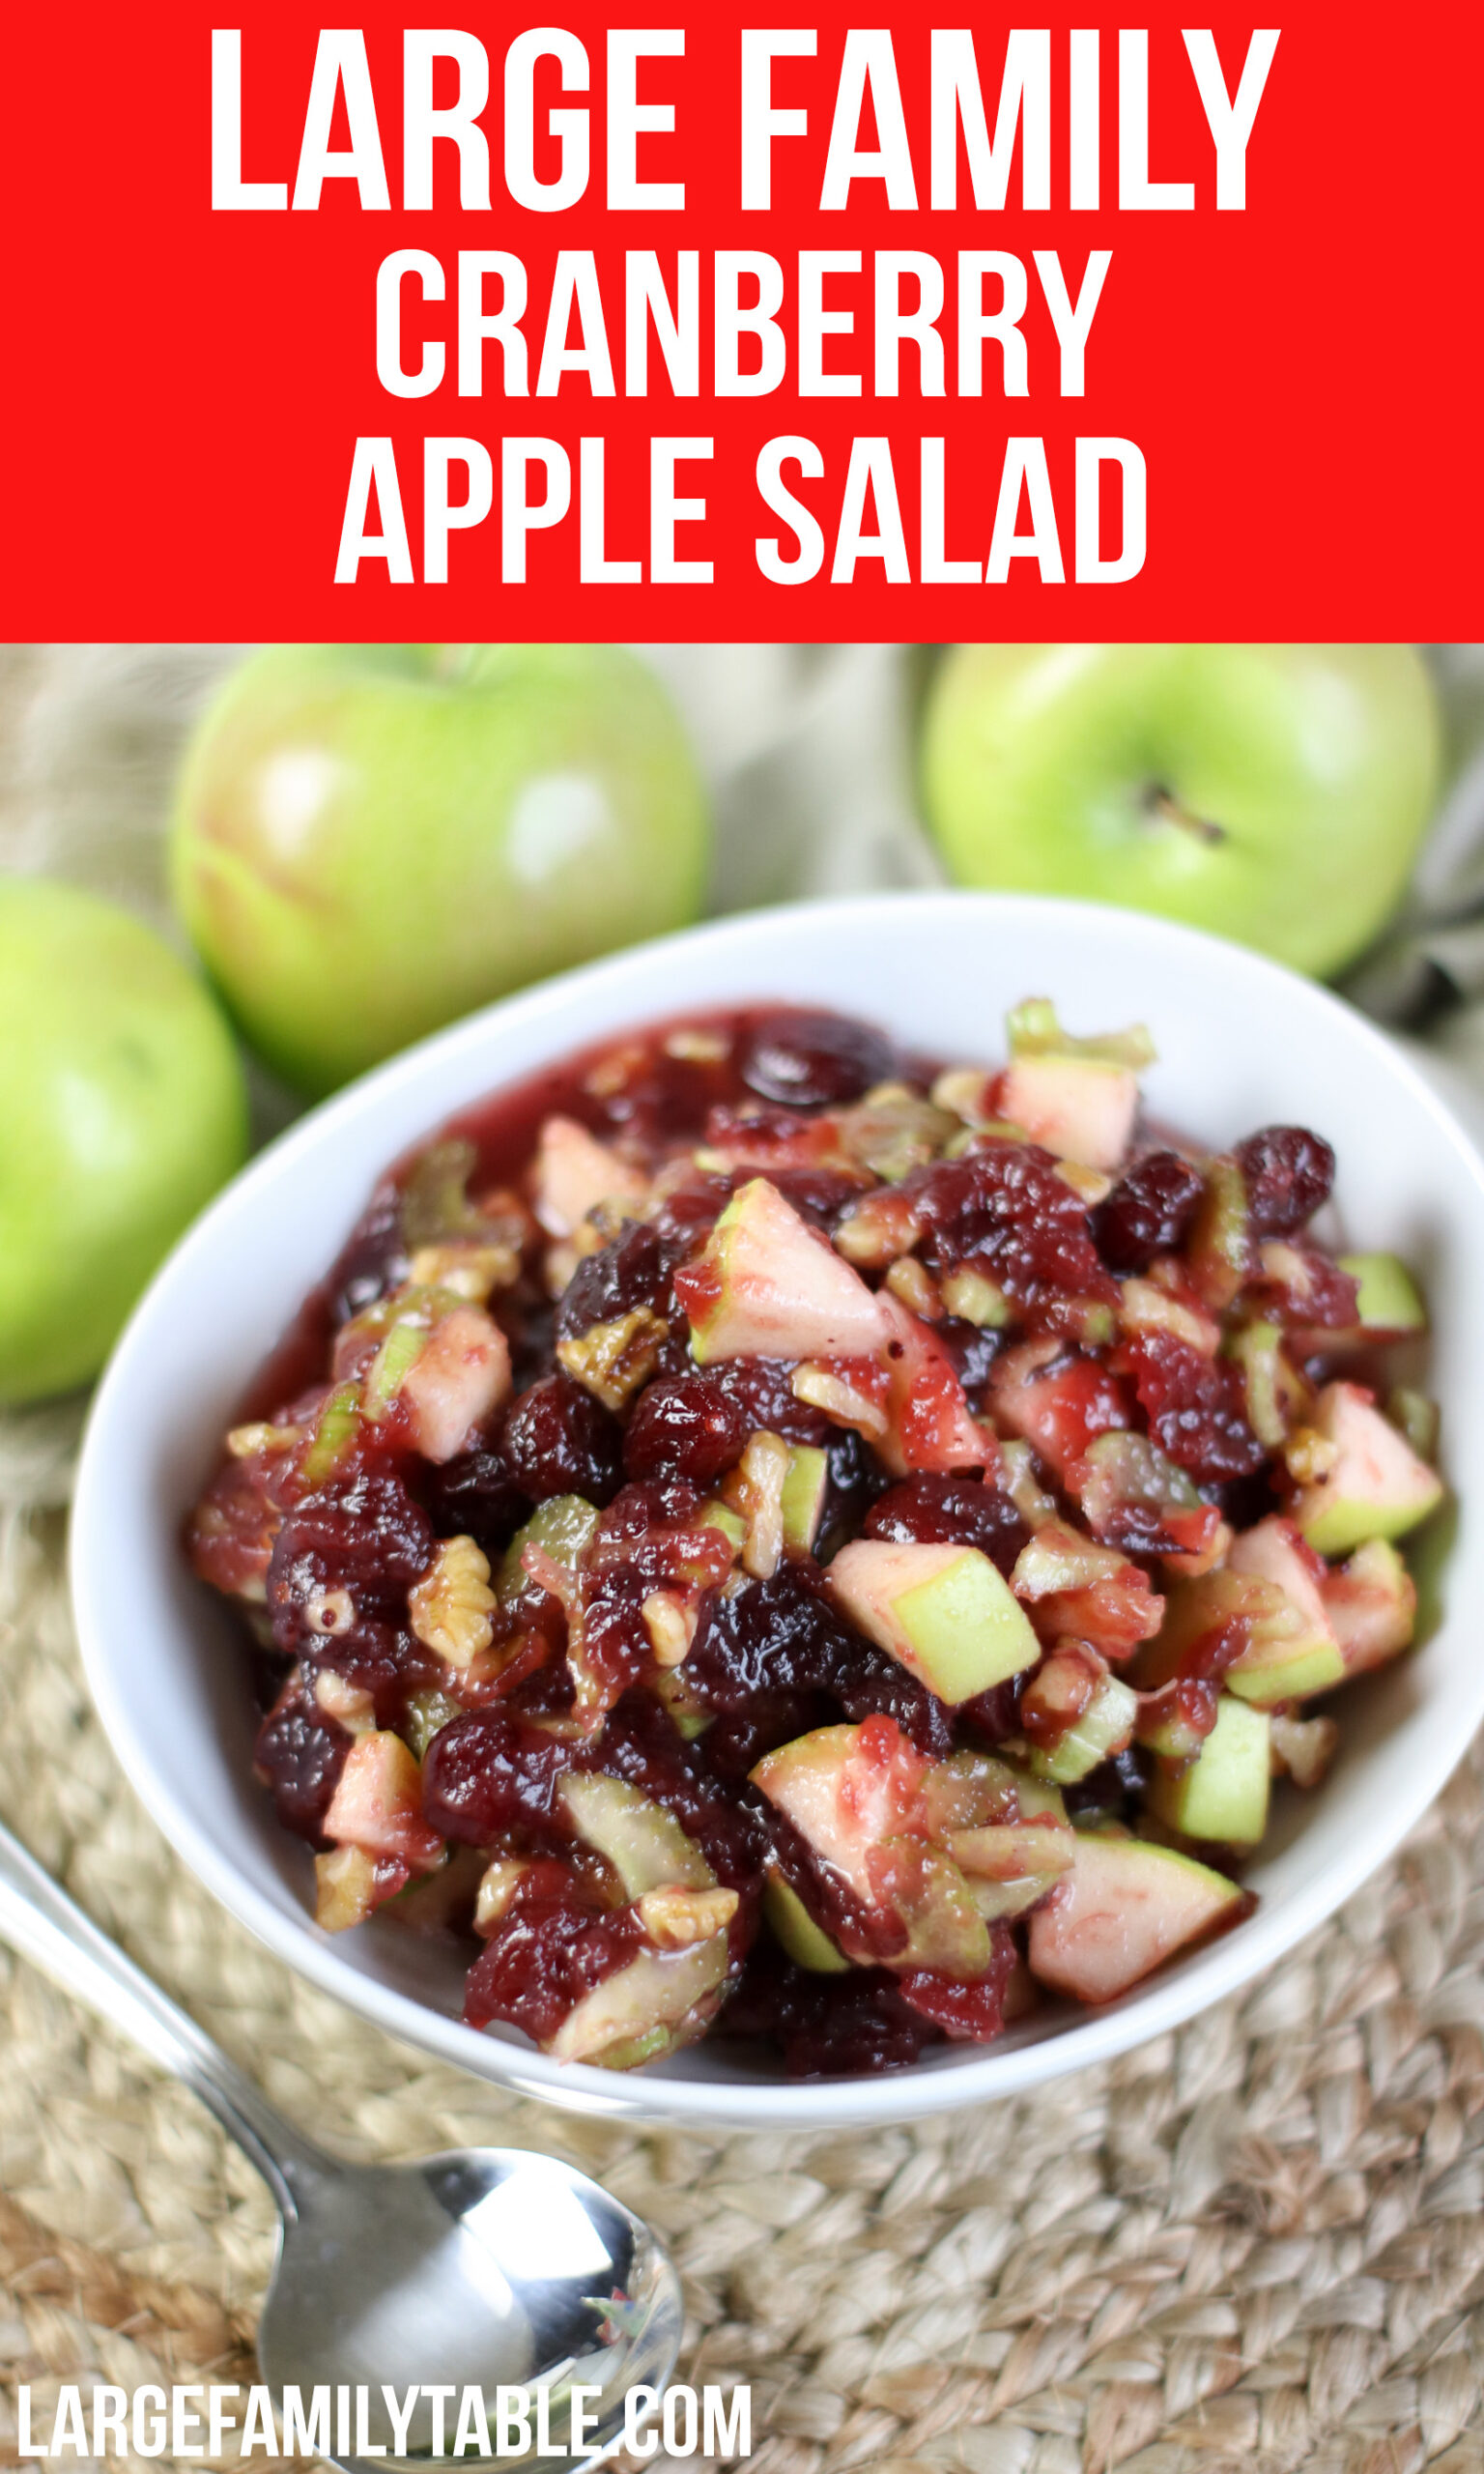 Large Family Cranberry Apple Salad | Sides for Large Families, Dairy Free